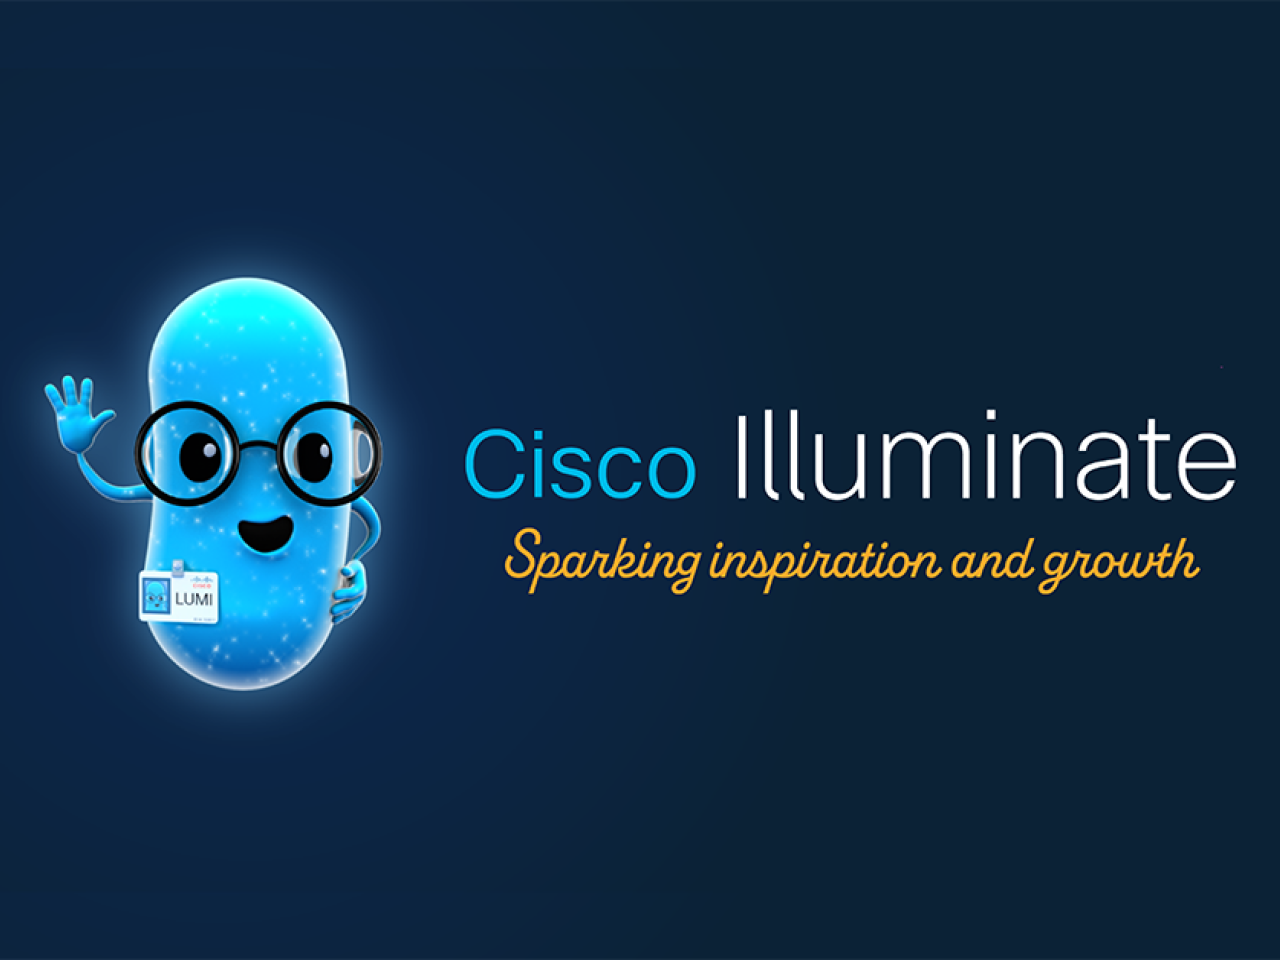 "Cisco Illuminate" A blue character with glasses waving.